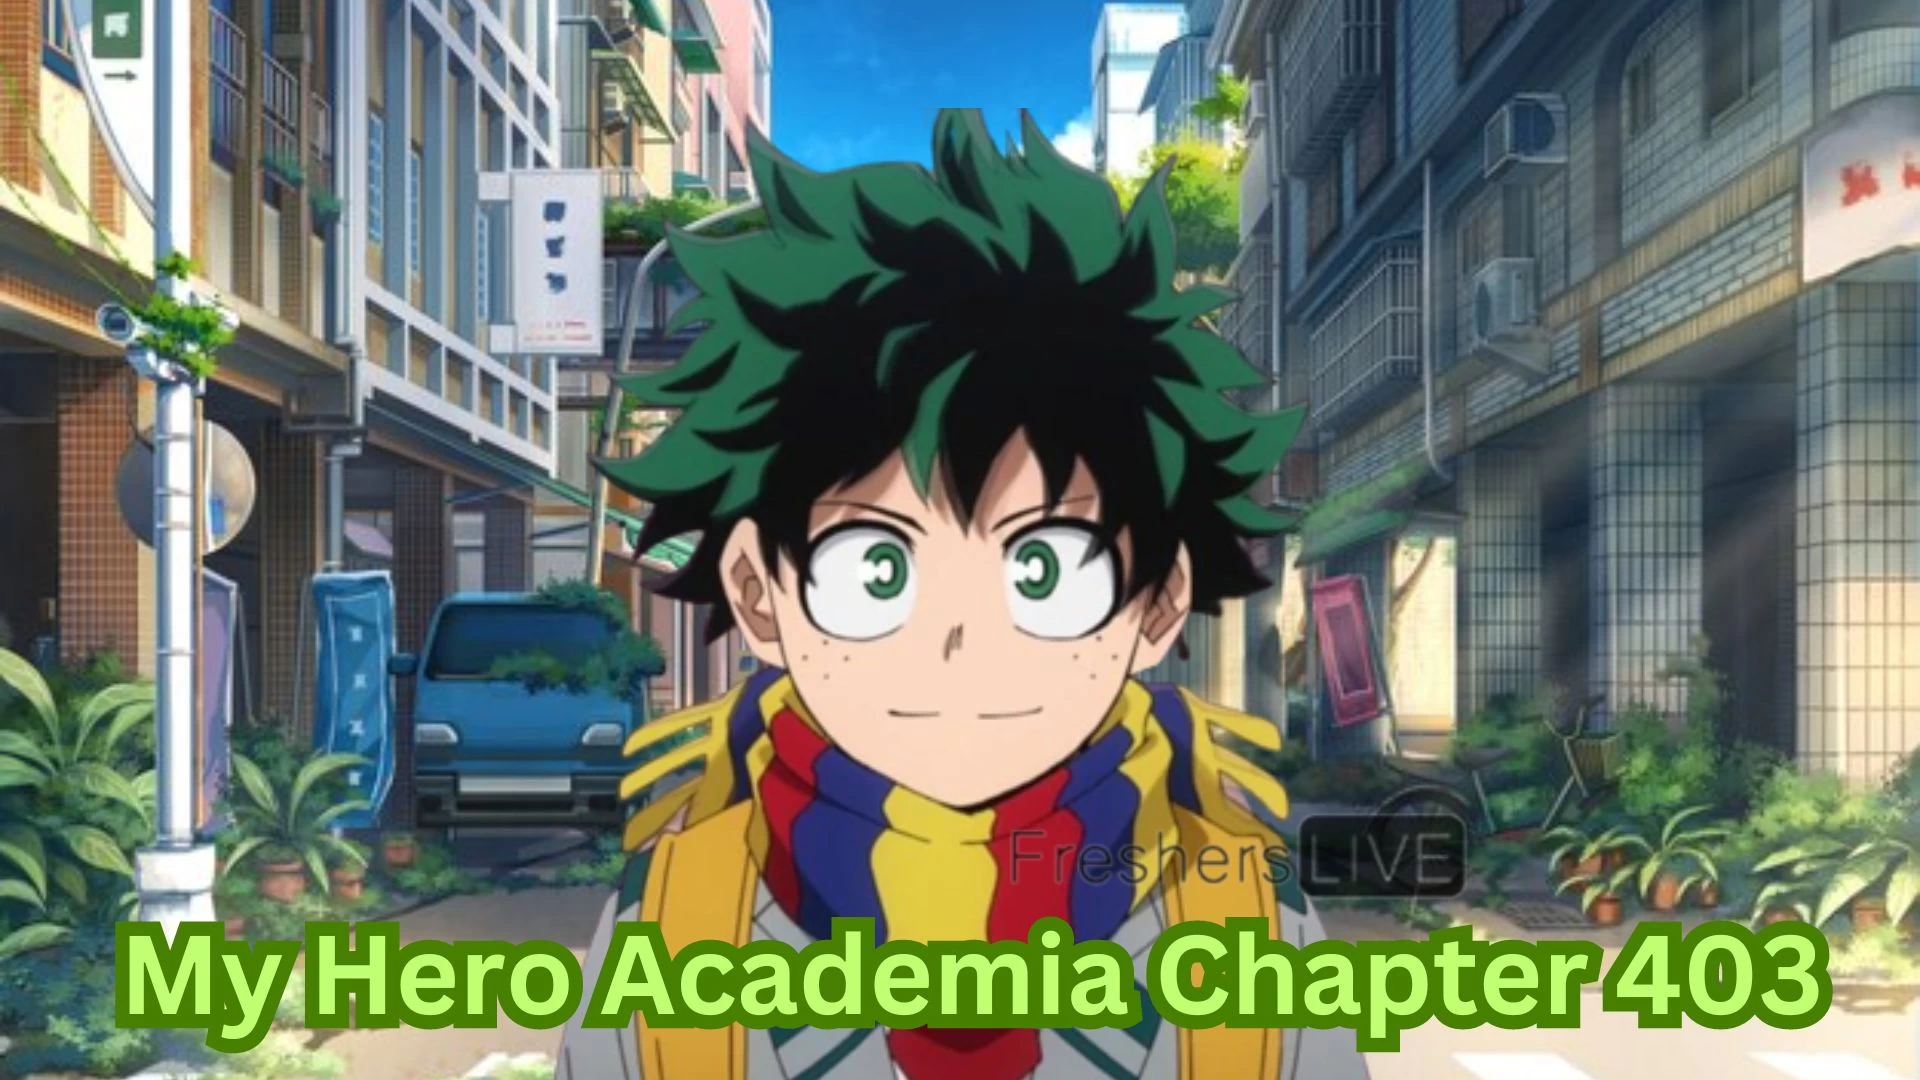 My Hero Academia Chapter 403 Spoiler, Release Date, Raw Scans, and More